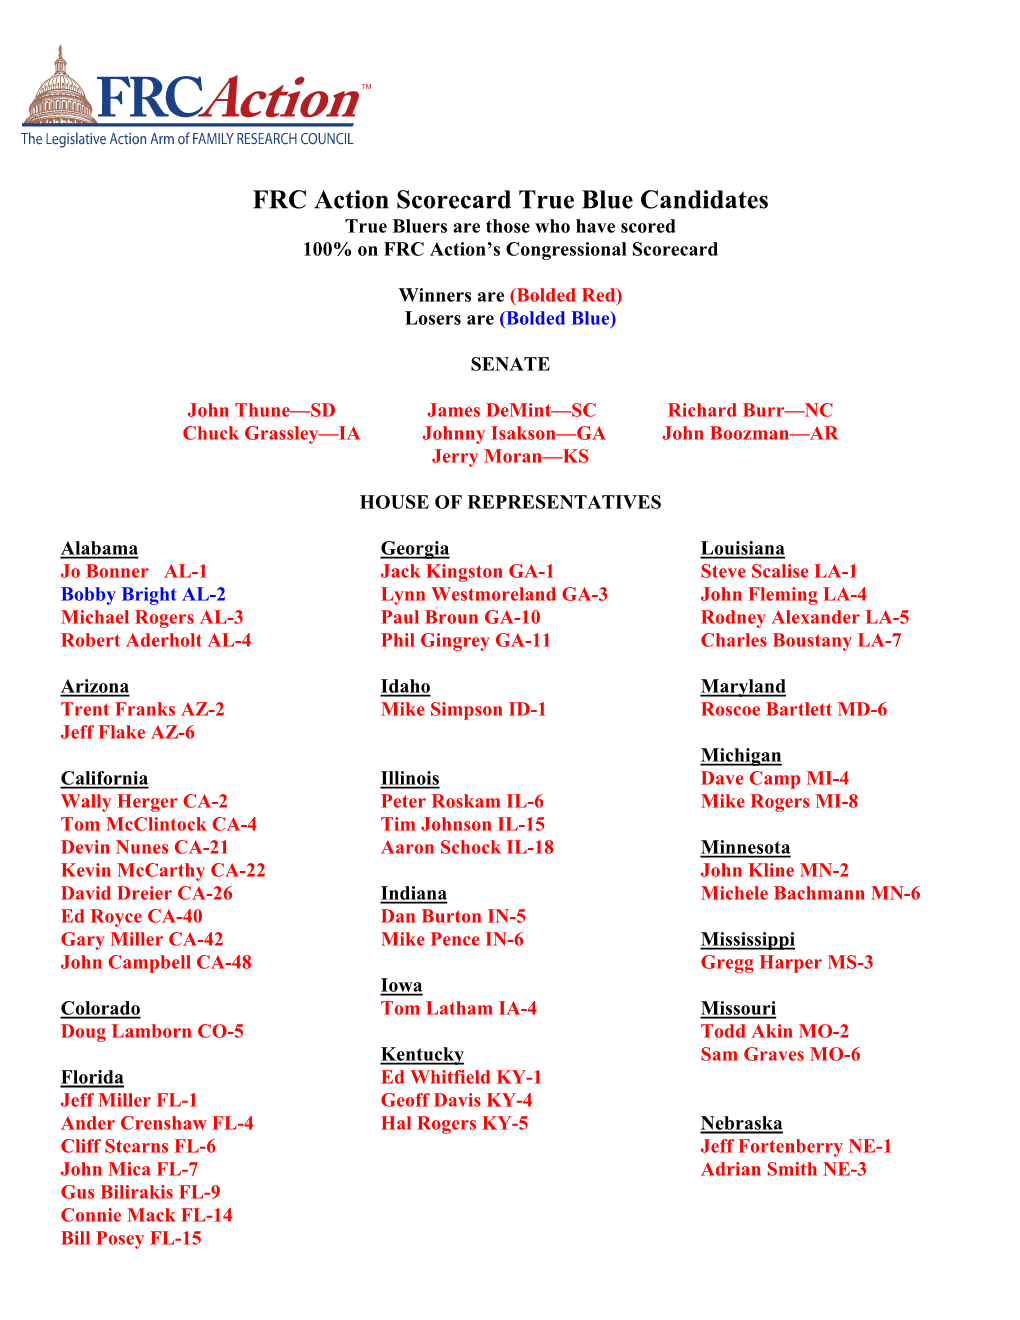 True Blue Candidates True Bluers Are Those Who Have Scored 100% on FRC Action’S Congressional Scorecard